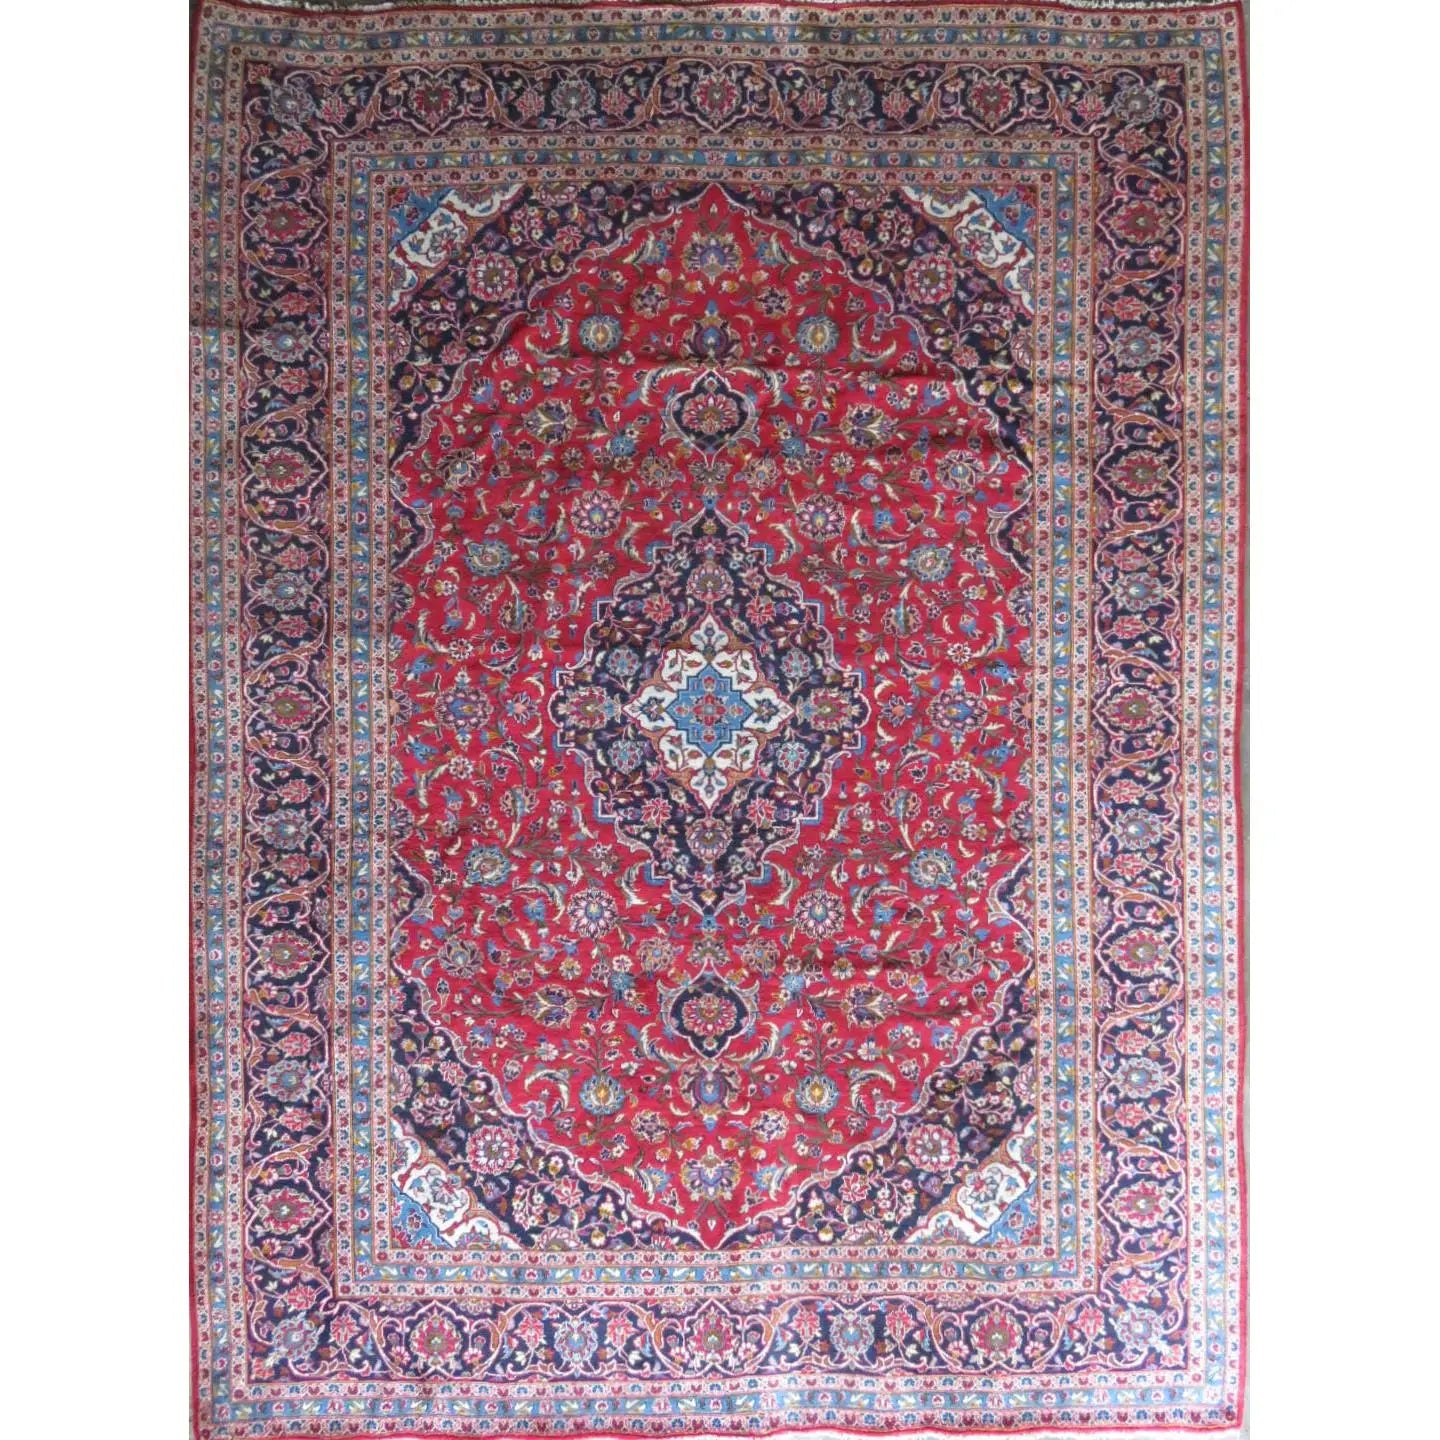 Hand-Knotted Persian Wool Rug _ Luxurious Vintage Design, 12'10" X 9'6", Artisan Crafted